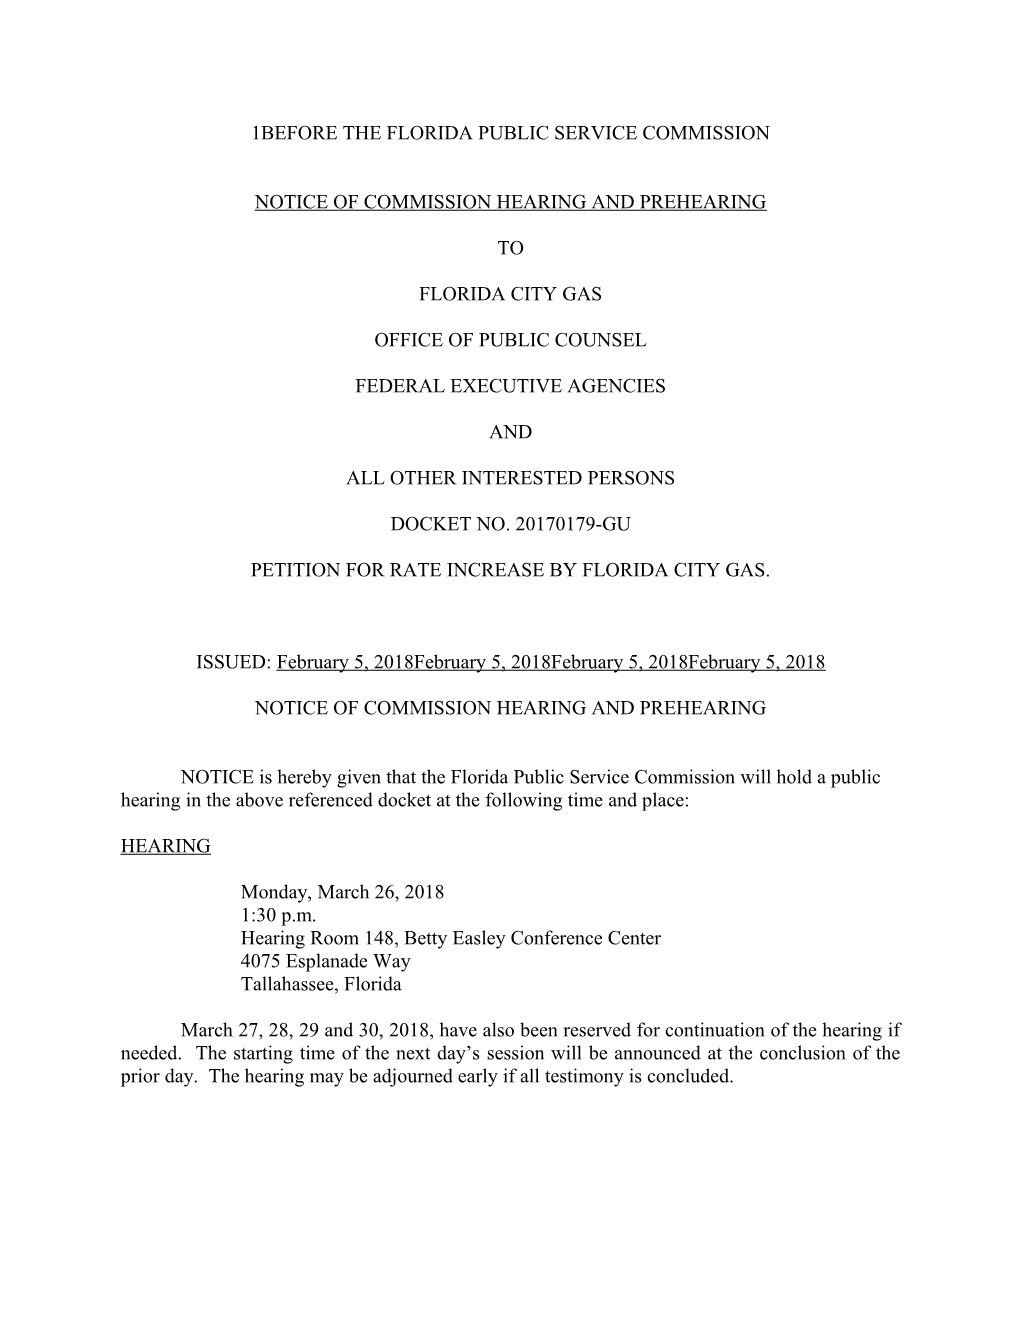 Notice of Commission Hearing and Prehearing